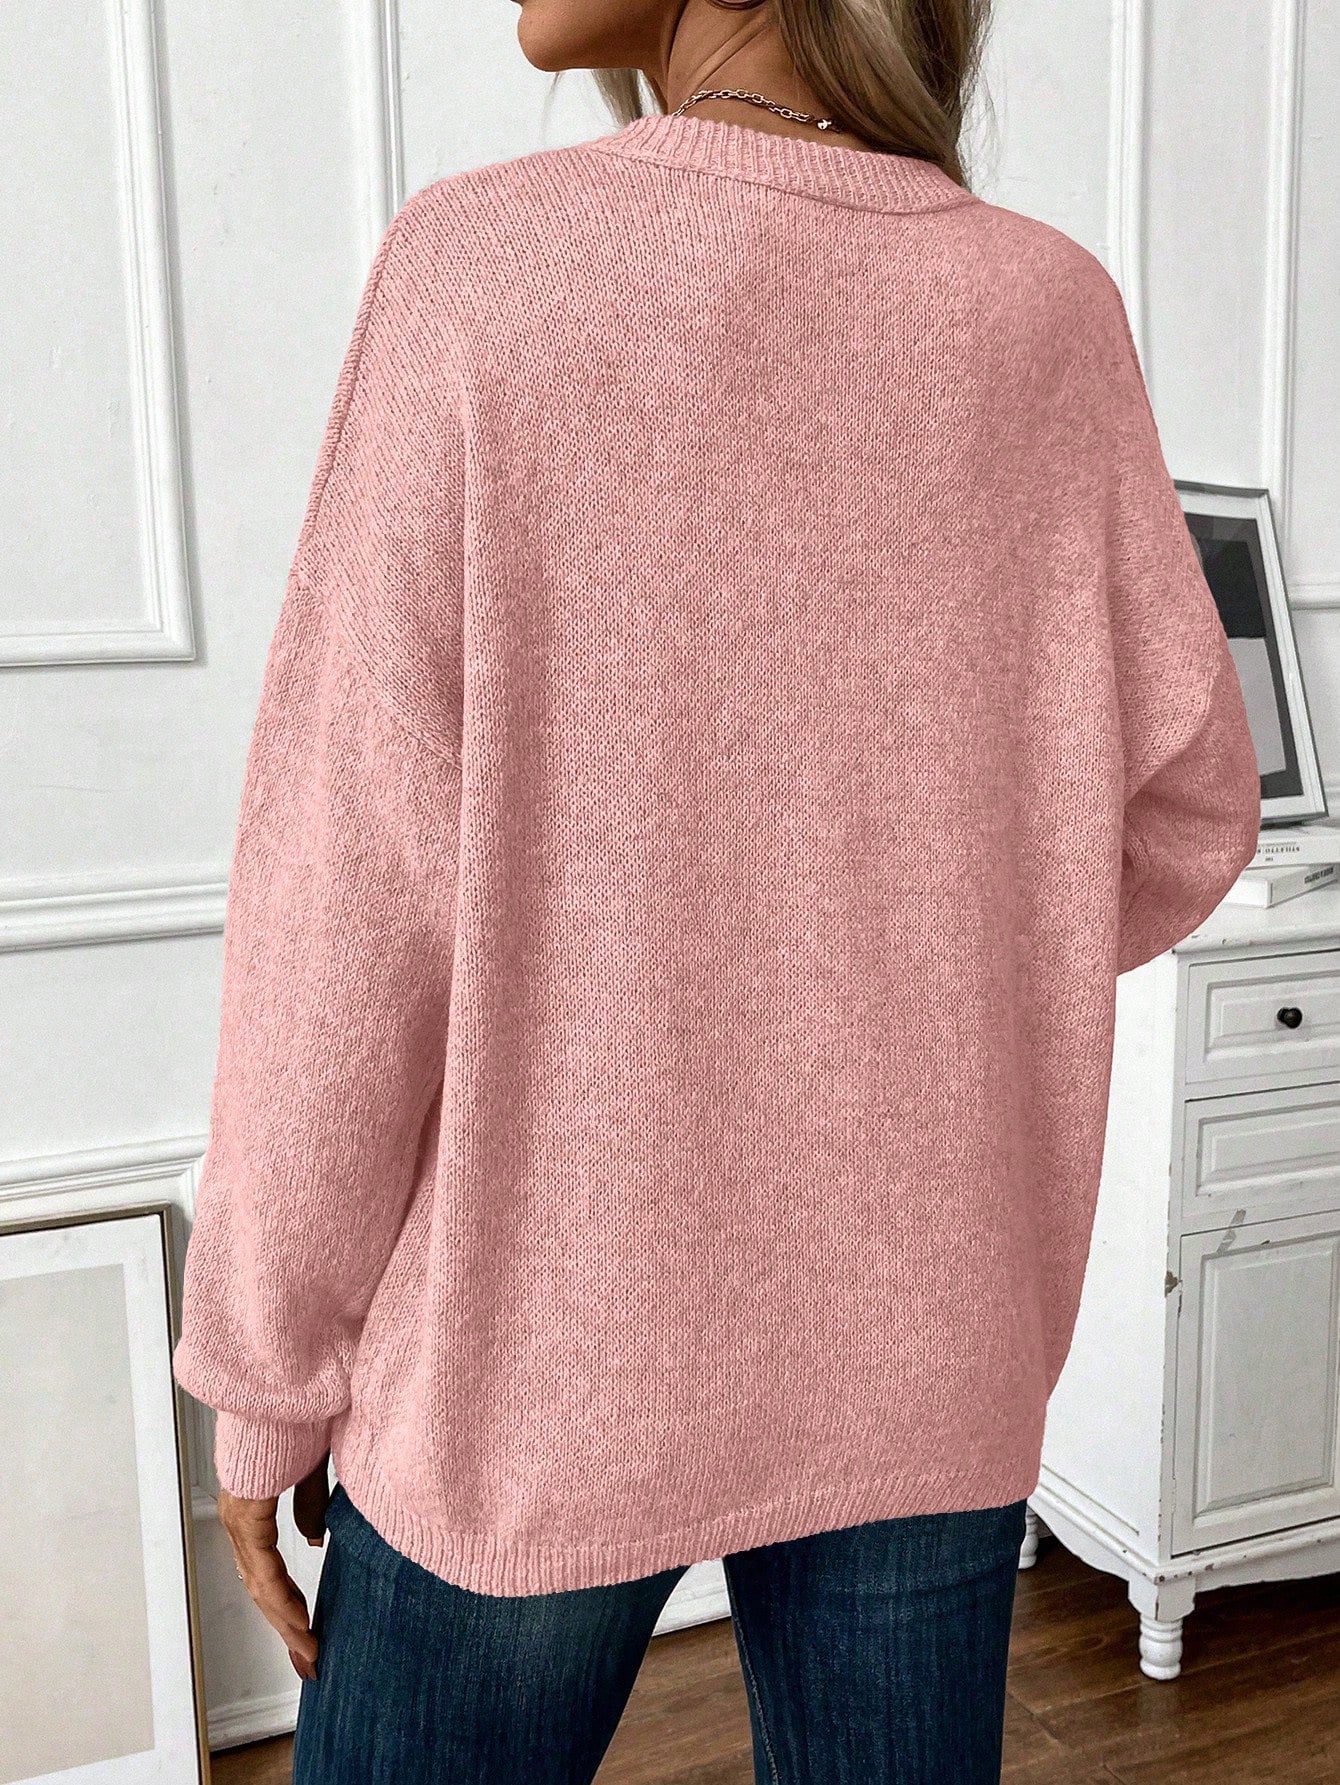 Frenchy Ladies' Solid Color Drop Shoulder Casual Sweater